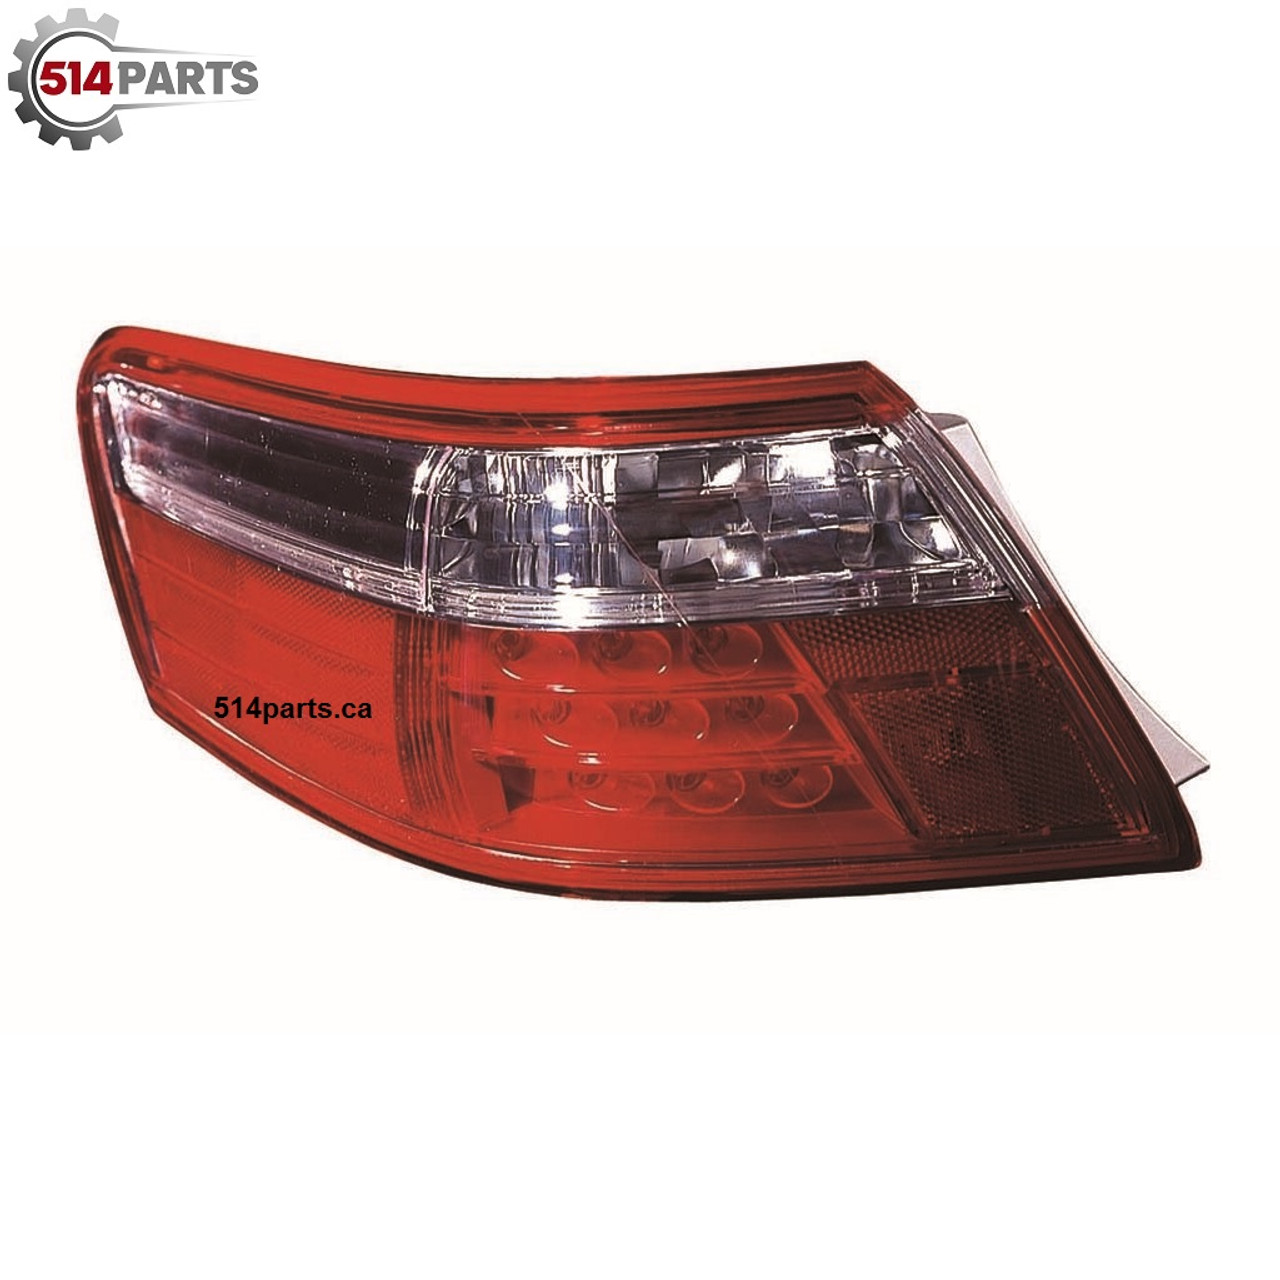 2007 - 2009 TOYOTA CAMRY HYBRID TAIL LIGHTS High Quality - PHARES ARRIERE Haute Qualite